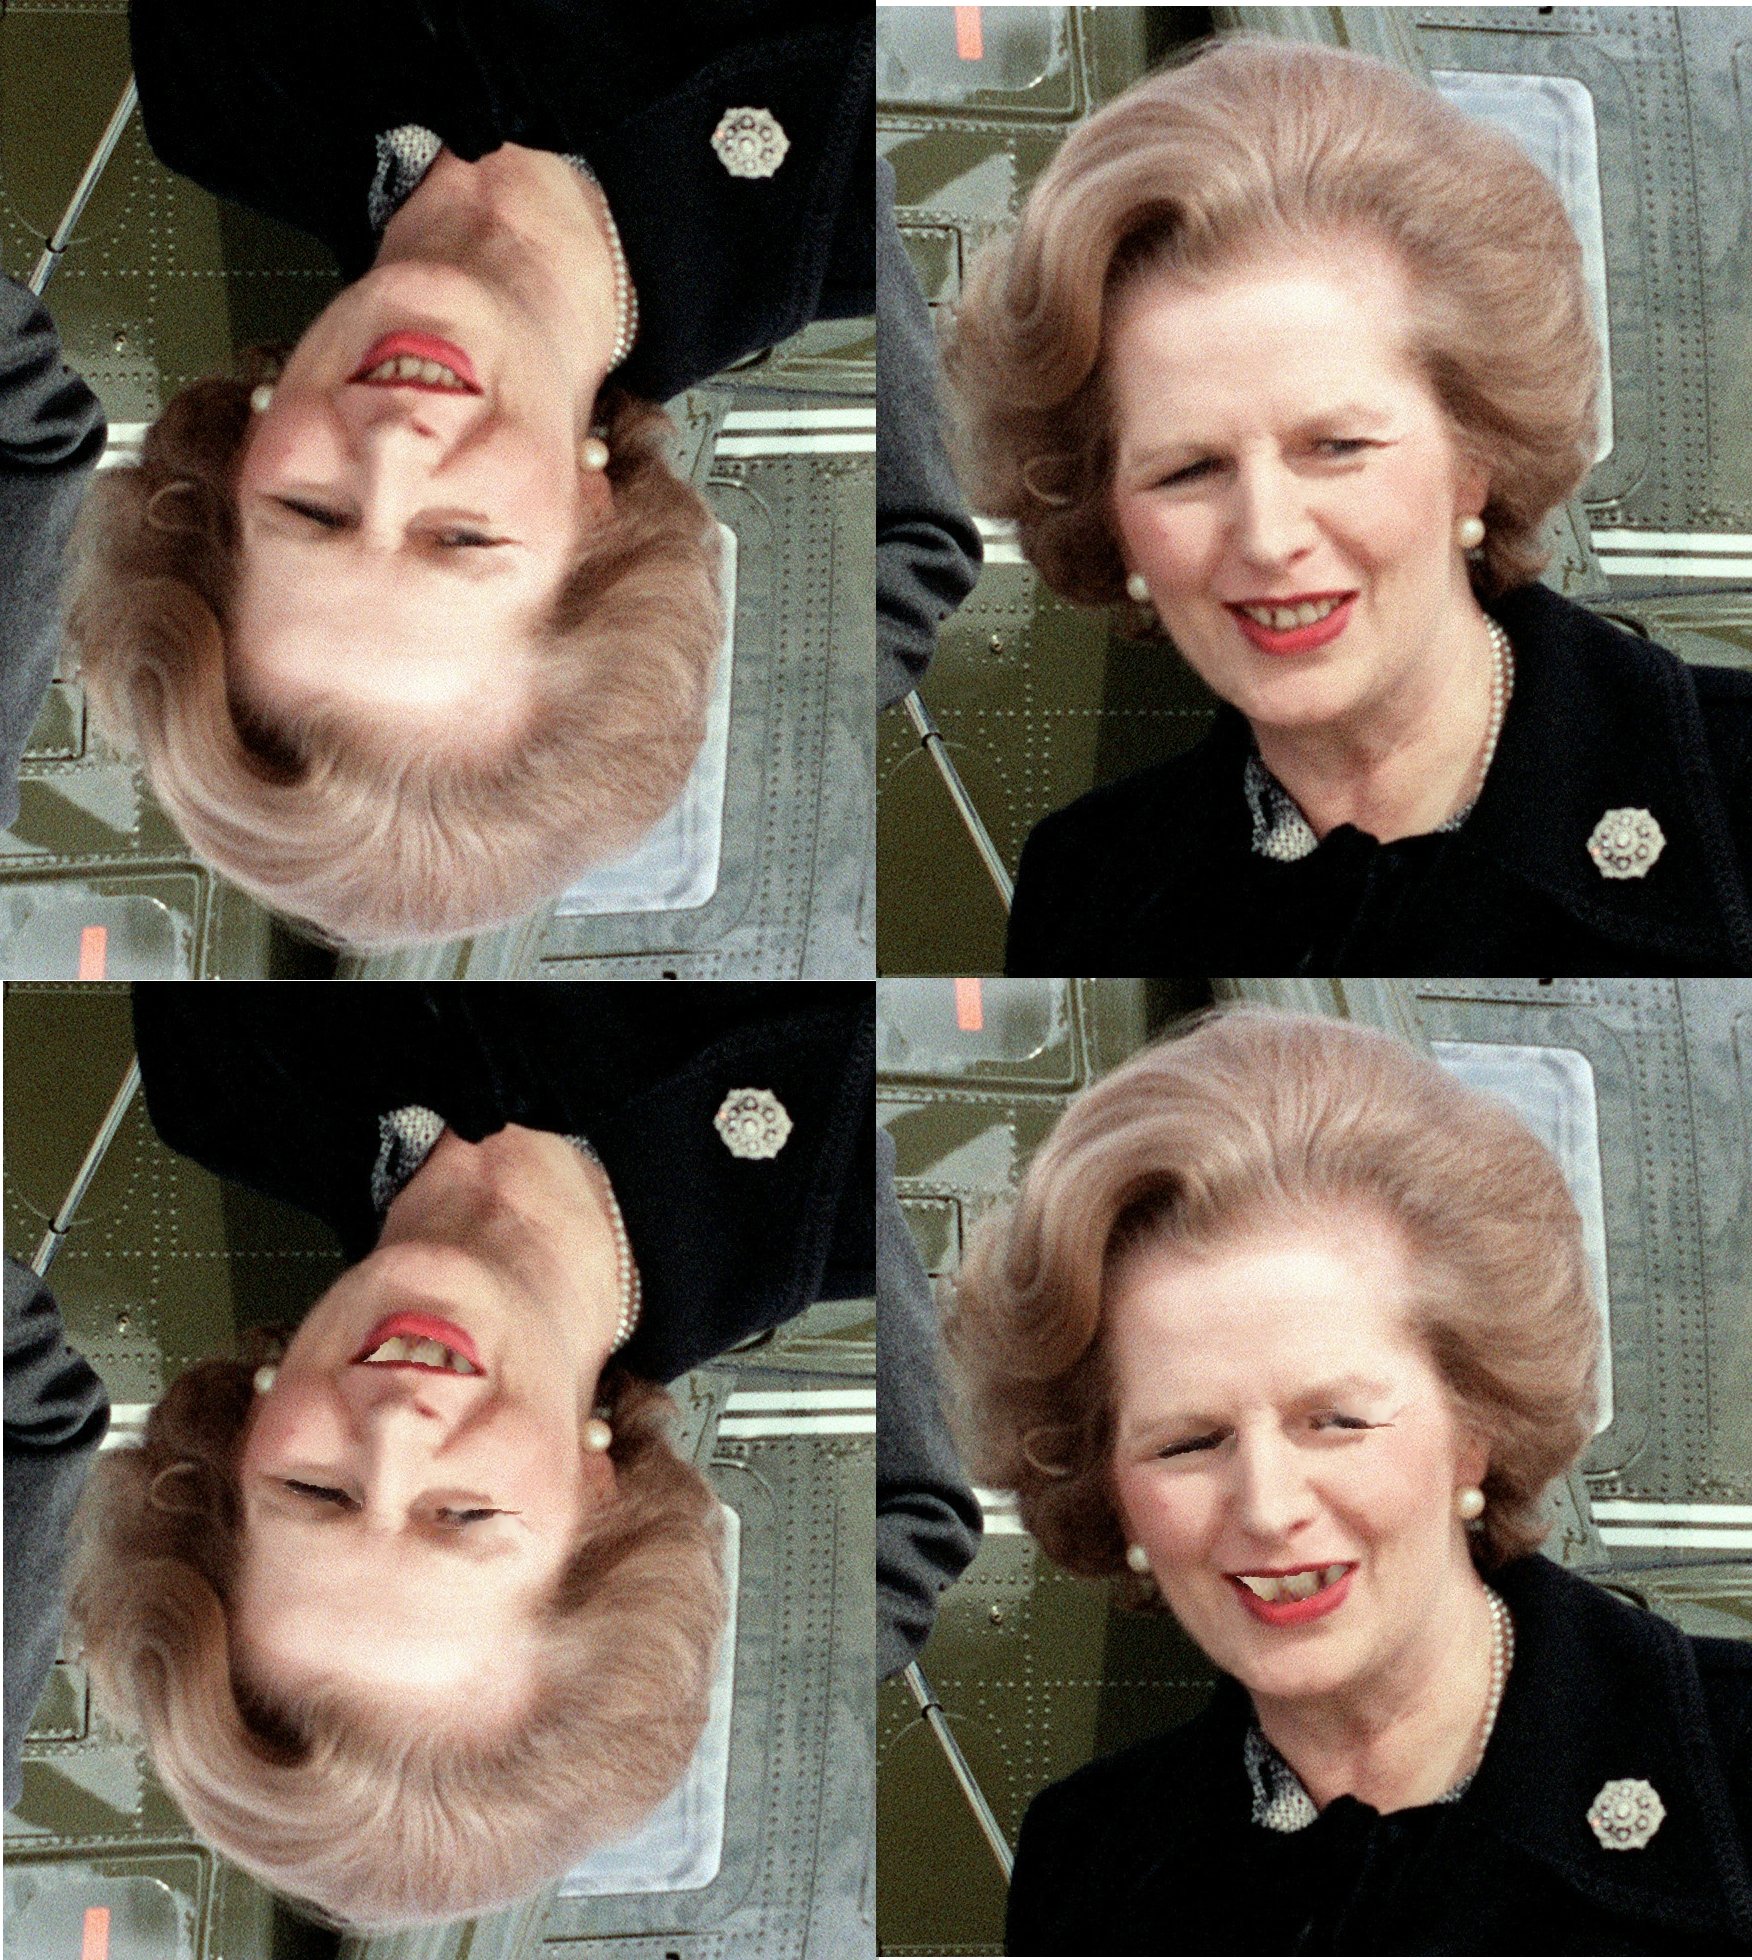 ”Sleep is for wimps”. Billede: Thatcher effect / wikimedia commons